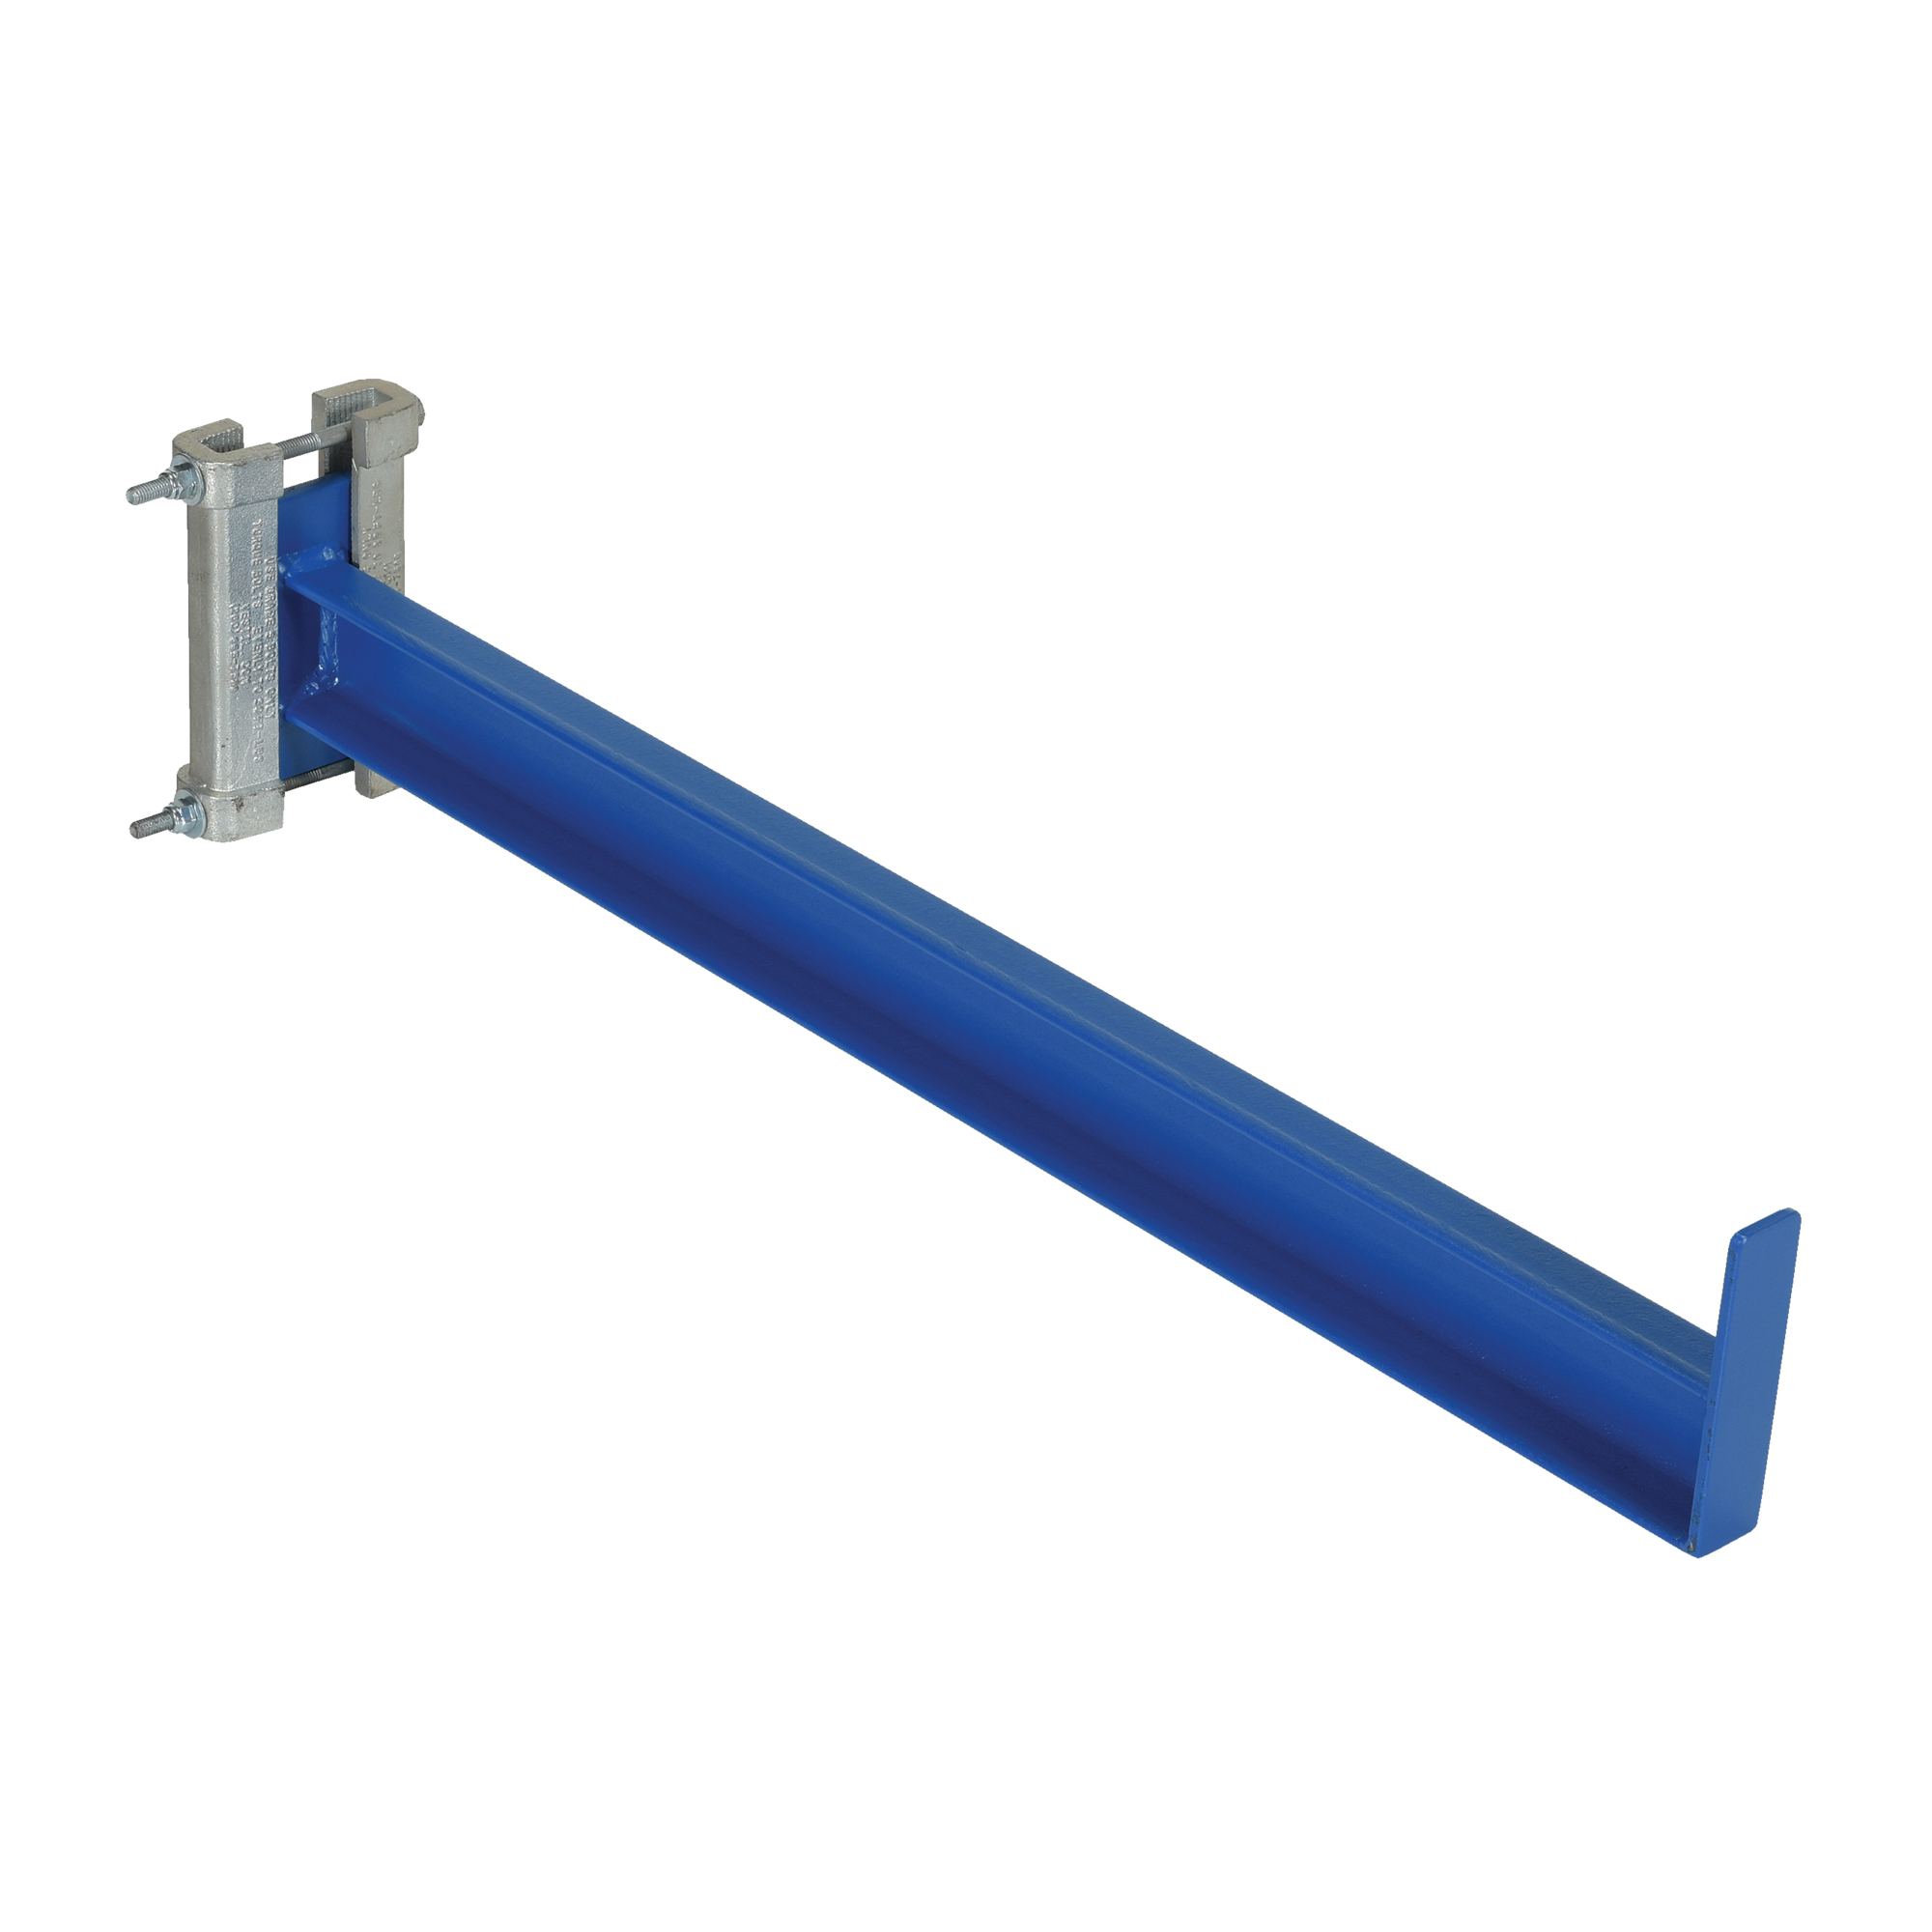 Vestil, Cantilever Straight Arm, Overall Height 8 in, Width 6.688 in, Depth 37.375 in, Model SSAL-36